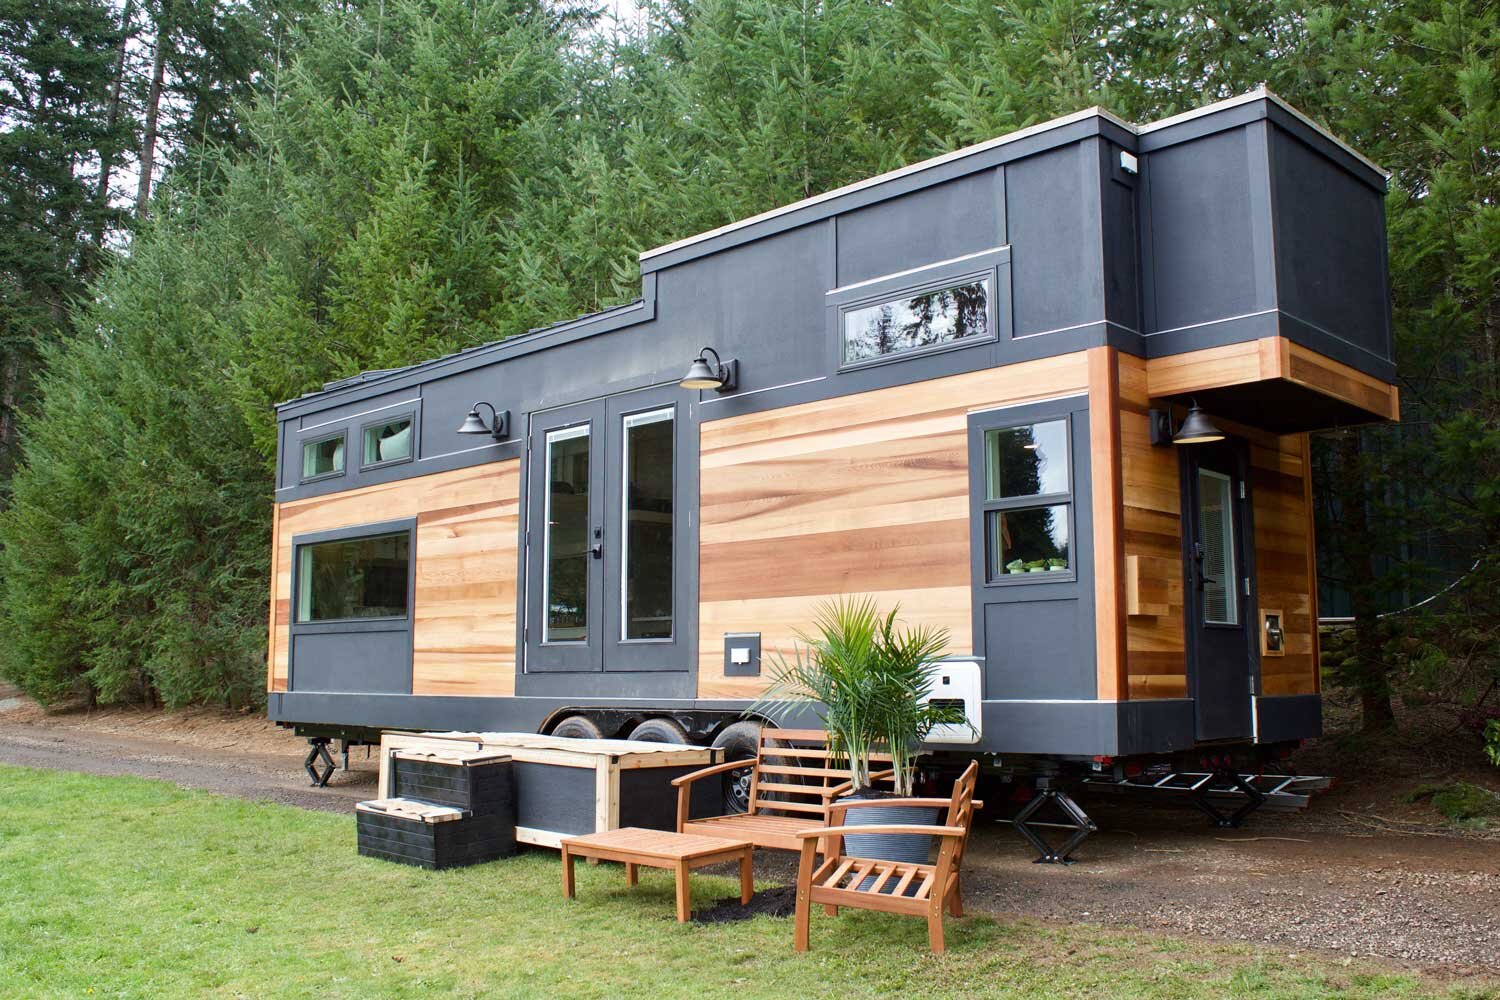 The Best Tiny Homes For Sale in Oregon - Plus 3 Affordable Tiny